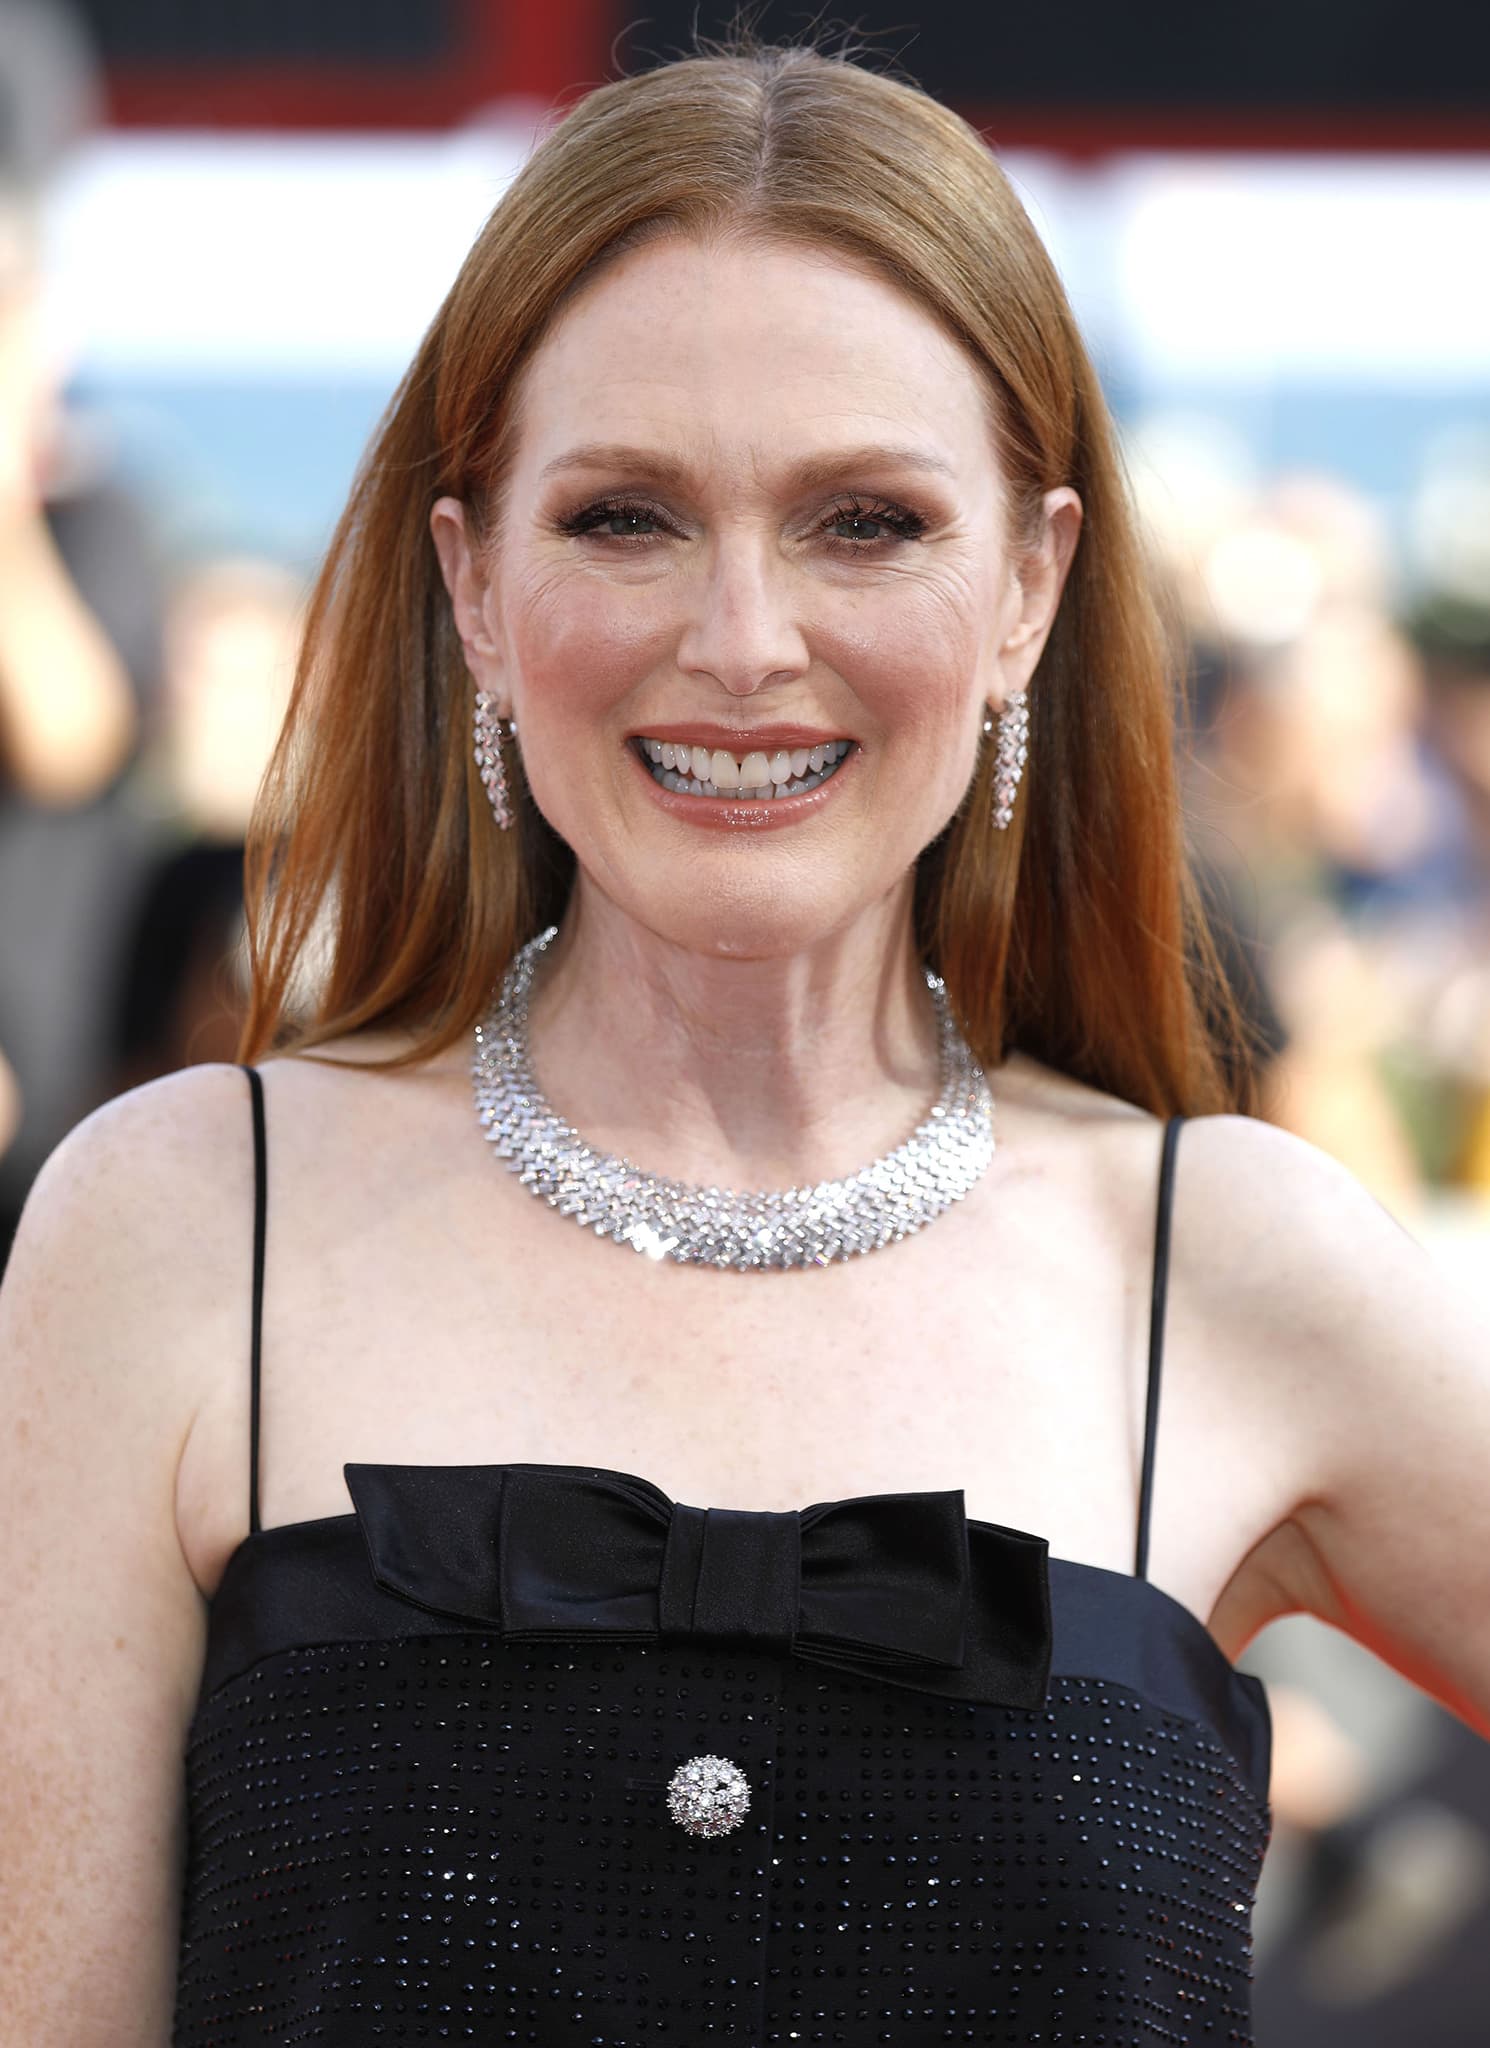 Julianne Moore wears her ginger hair straight and highlights her eyes with subtle smokey eyeshadow and mascara